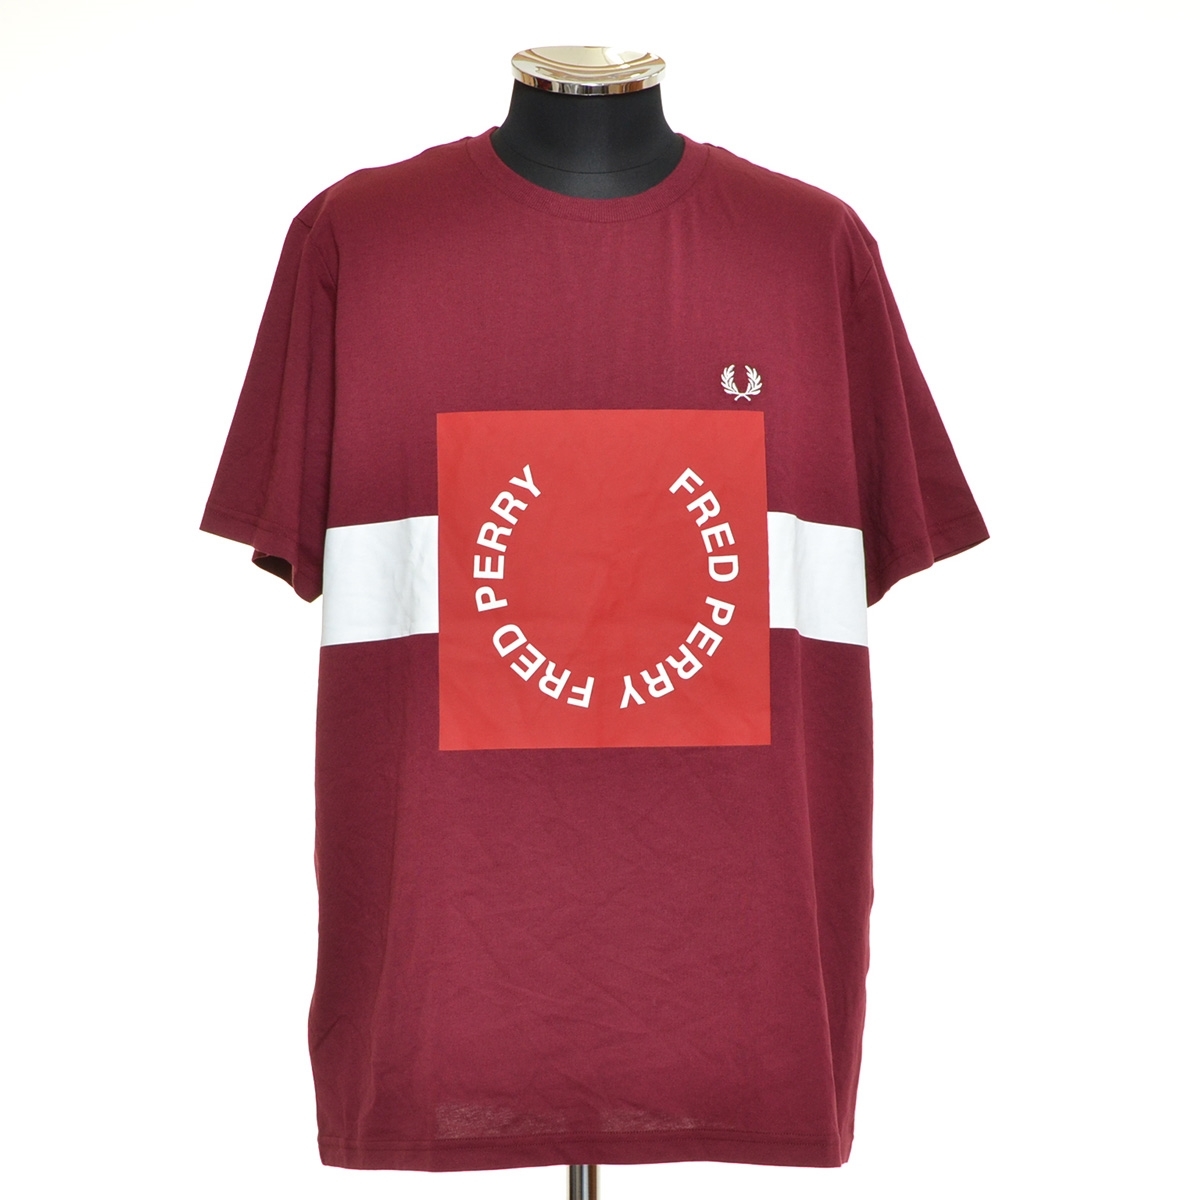 *485673 unused goods FRED PERRY Fred Perry * T-shirt short sleeves BOLD GRAPHIC T-SHIRT M8521 size L( domestic XL corresponding ) men's bordeaux 